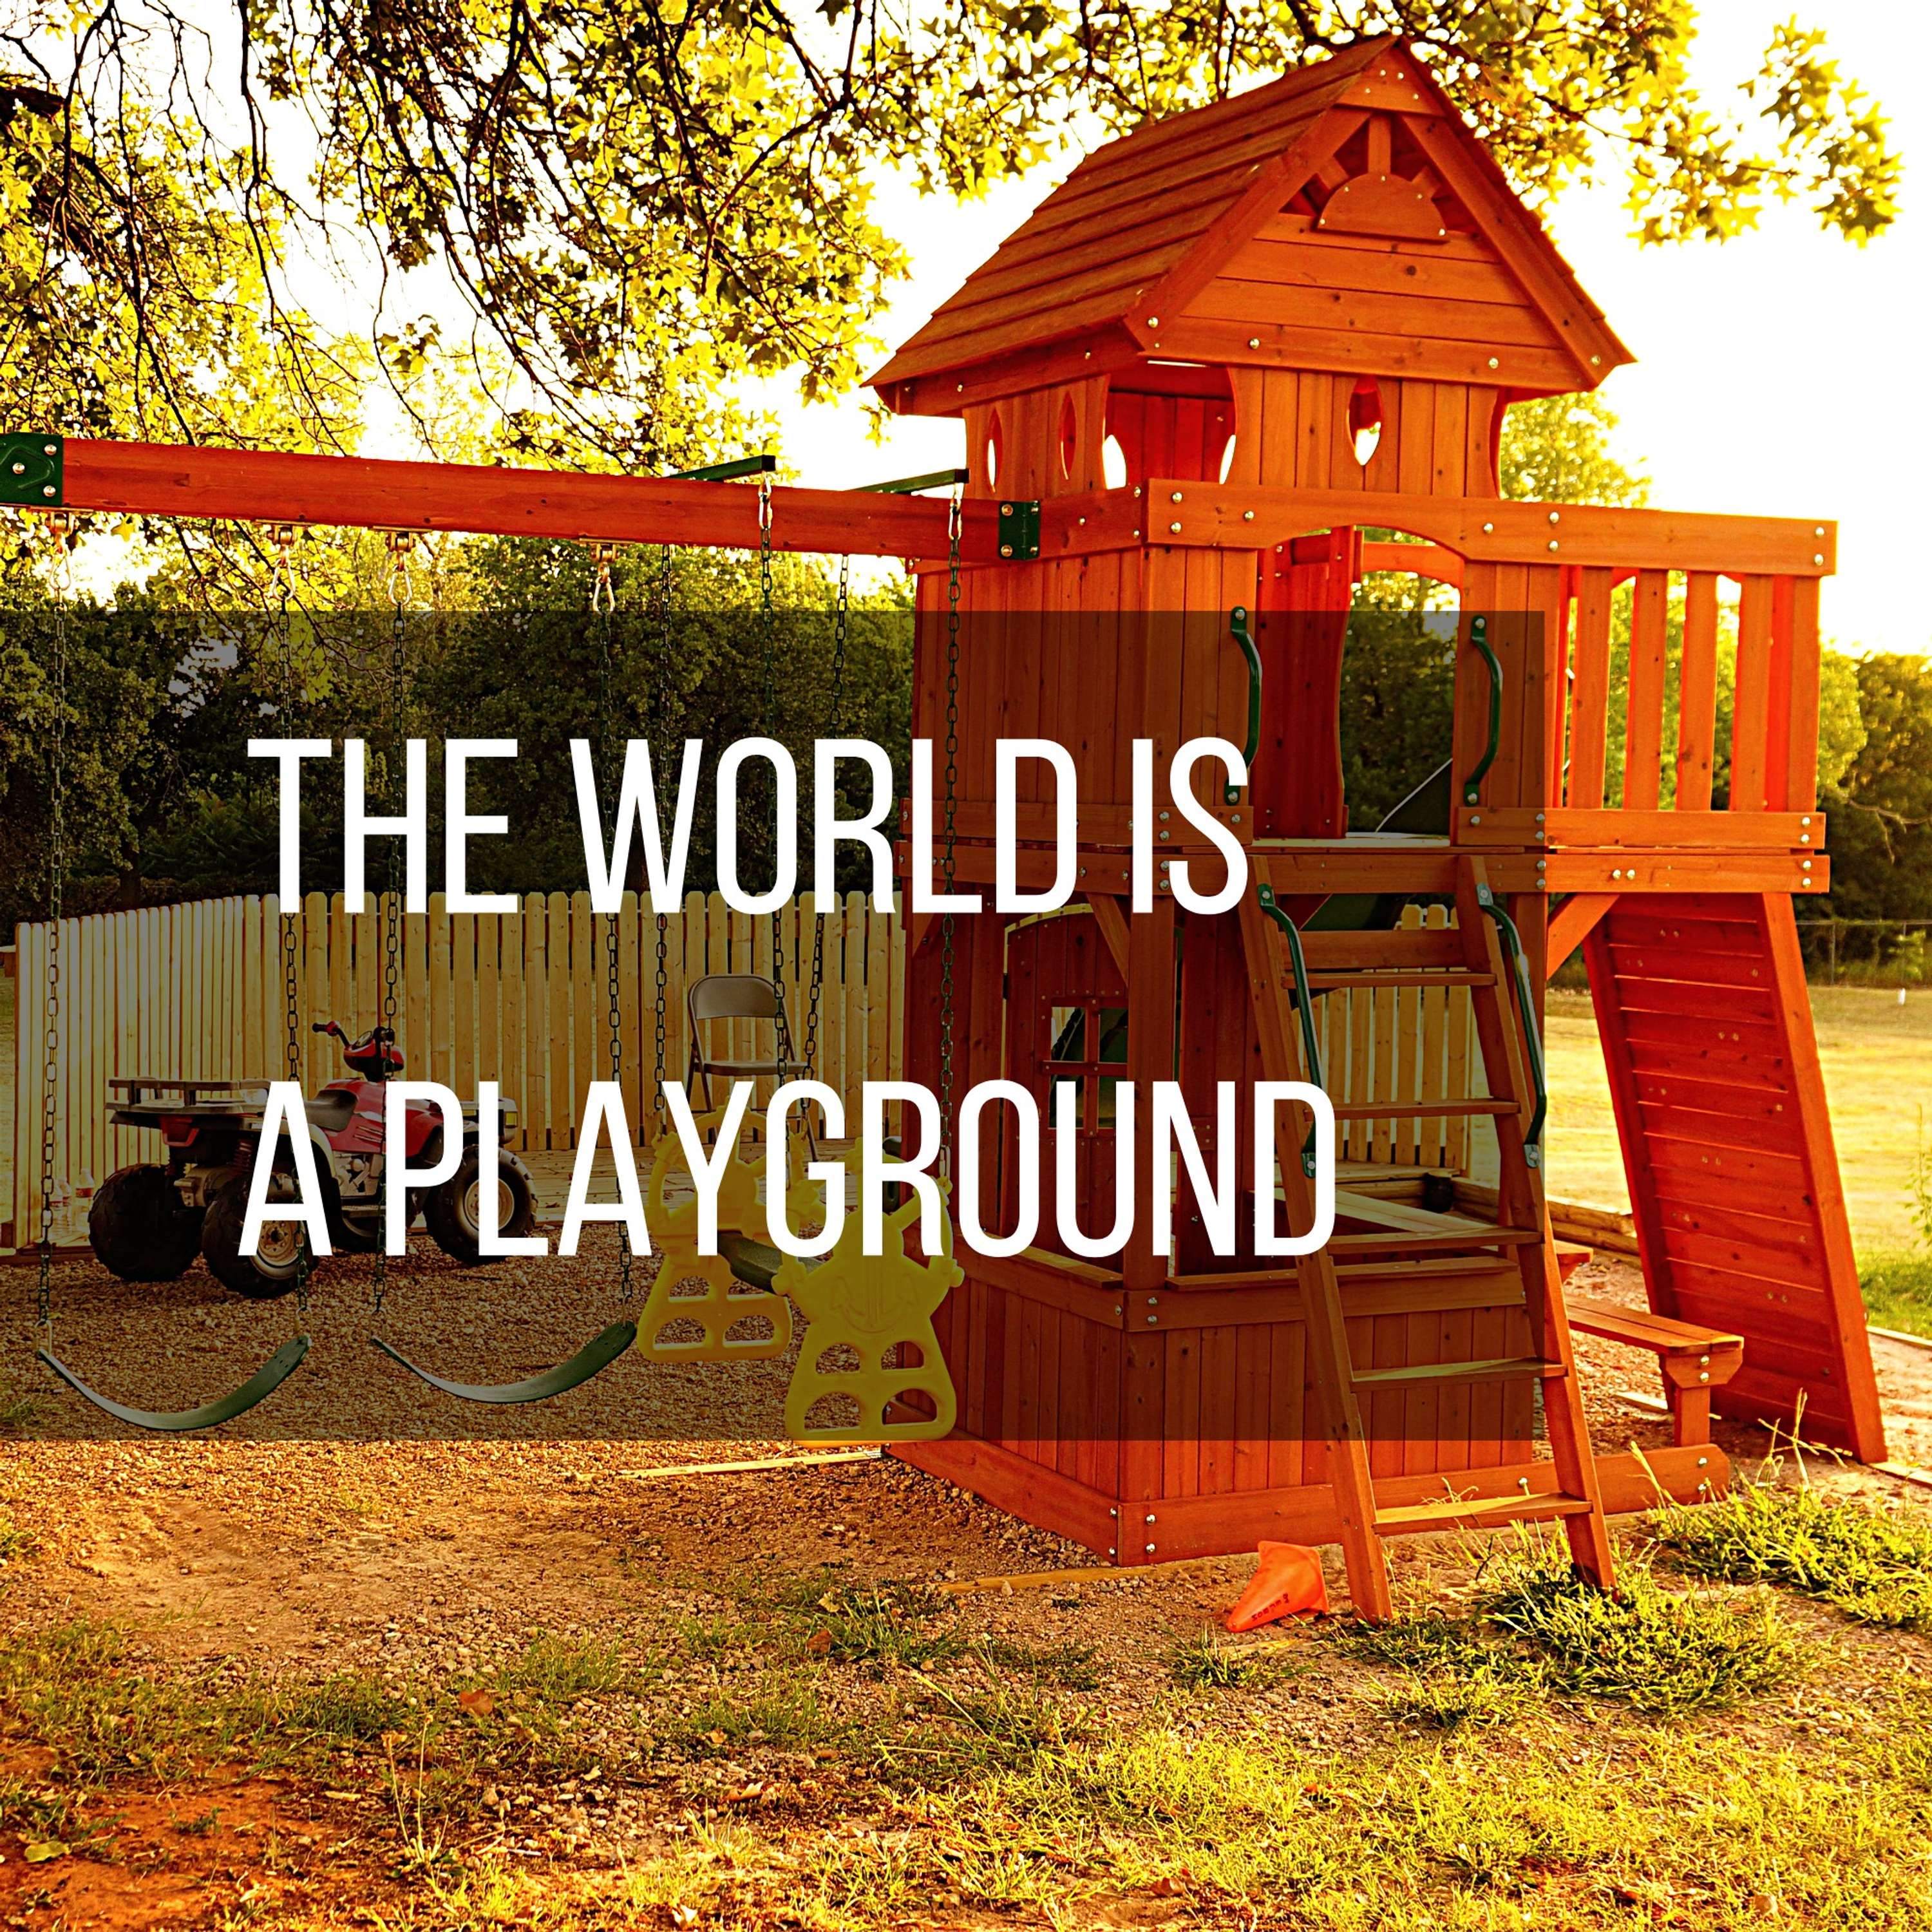 57: The World Is A Playground